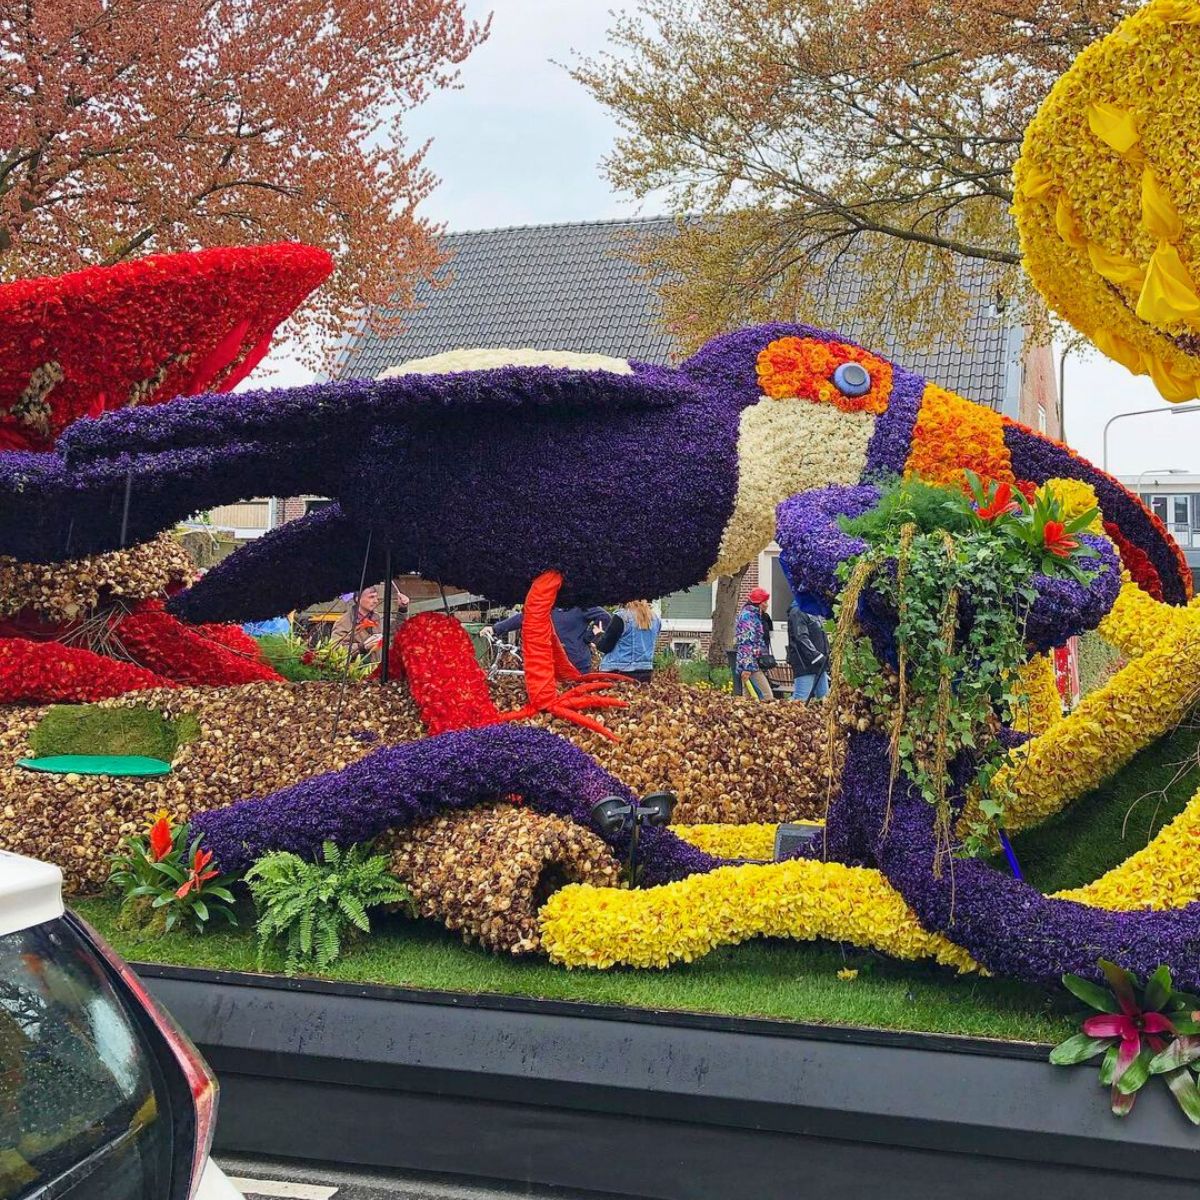 A toucan made out of flowers